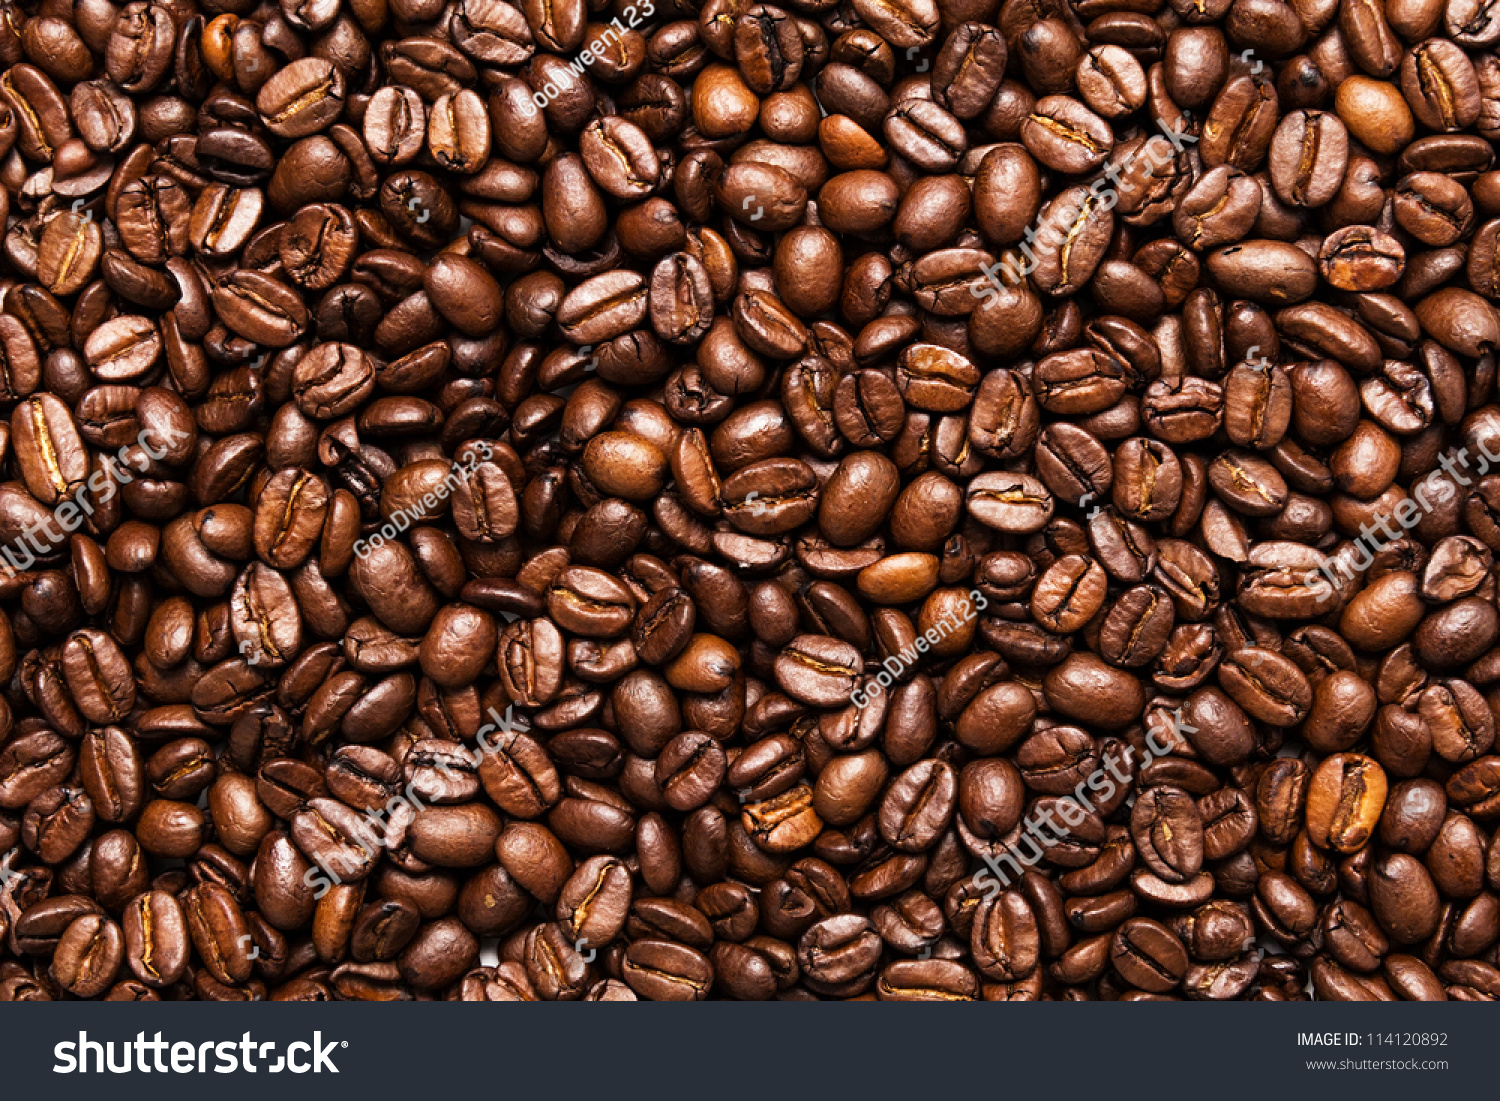 roasted coffee beans, can be used as a background #114120892